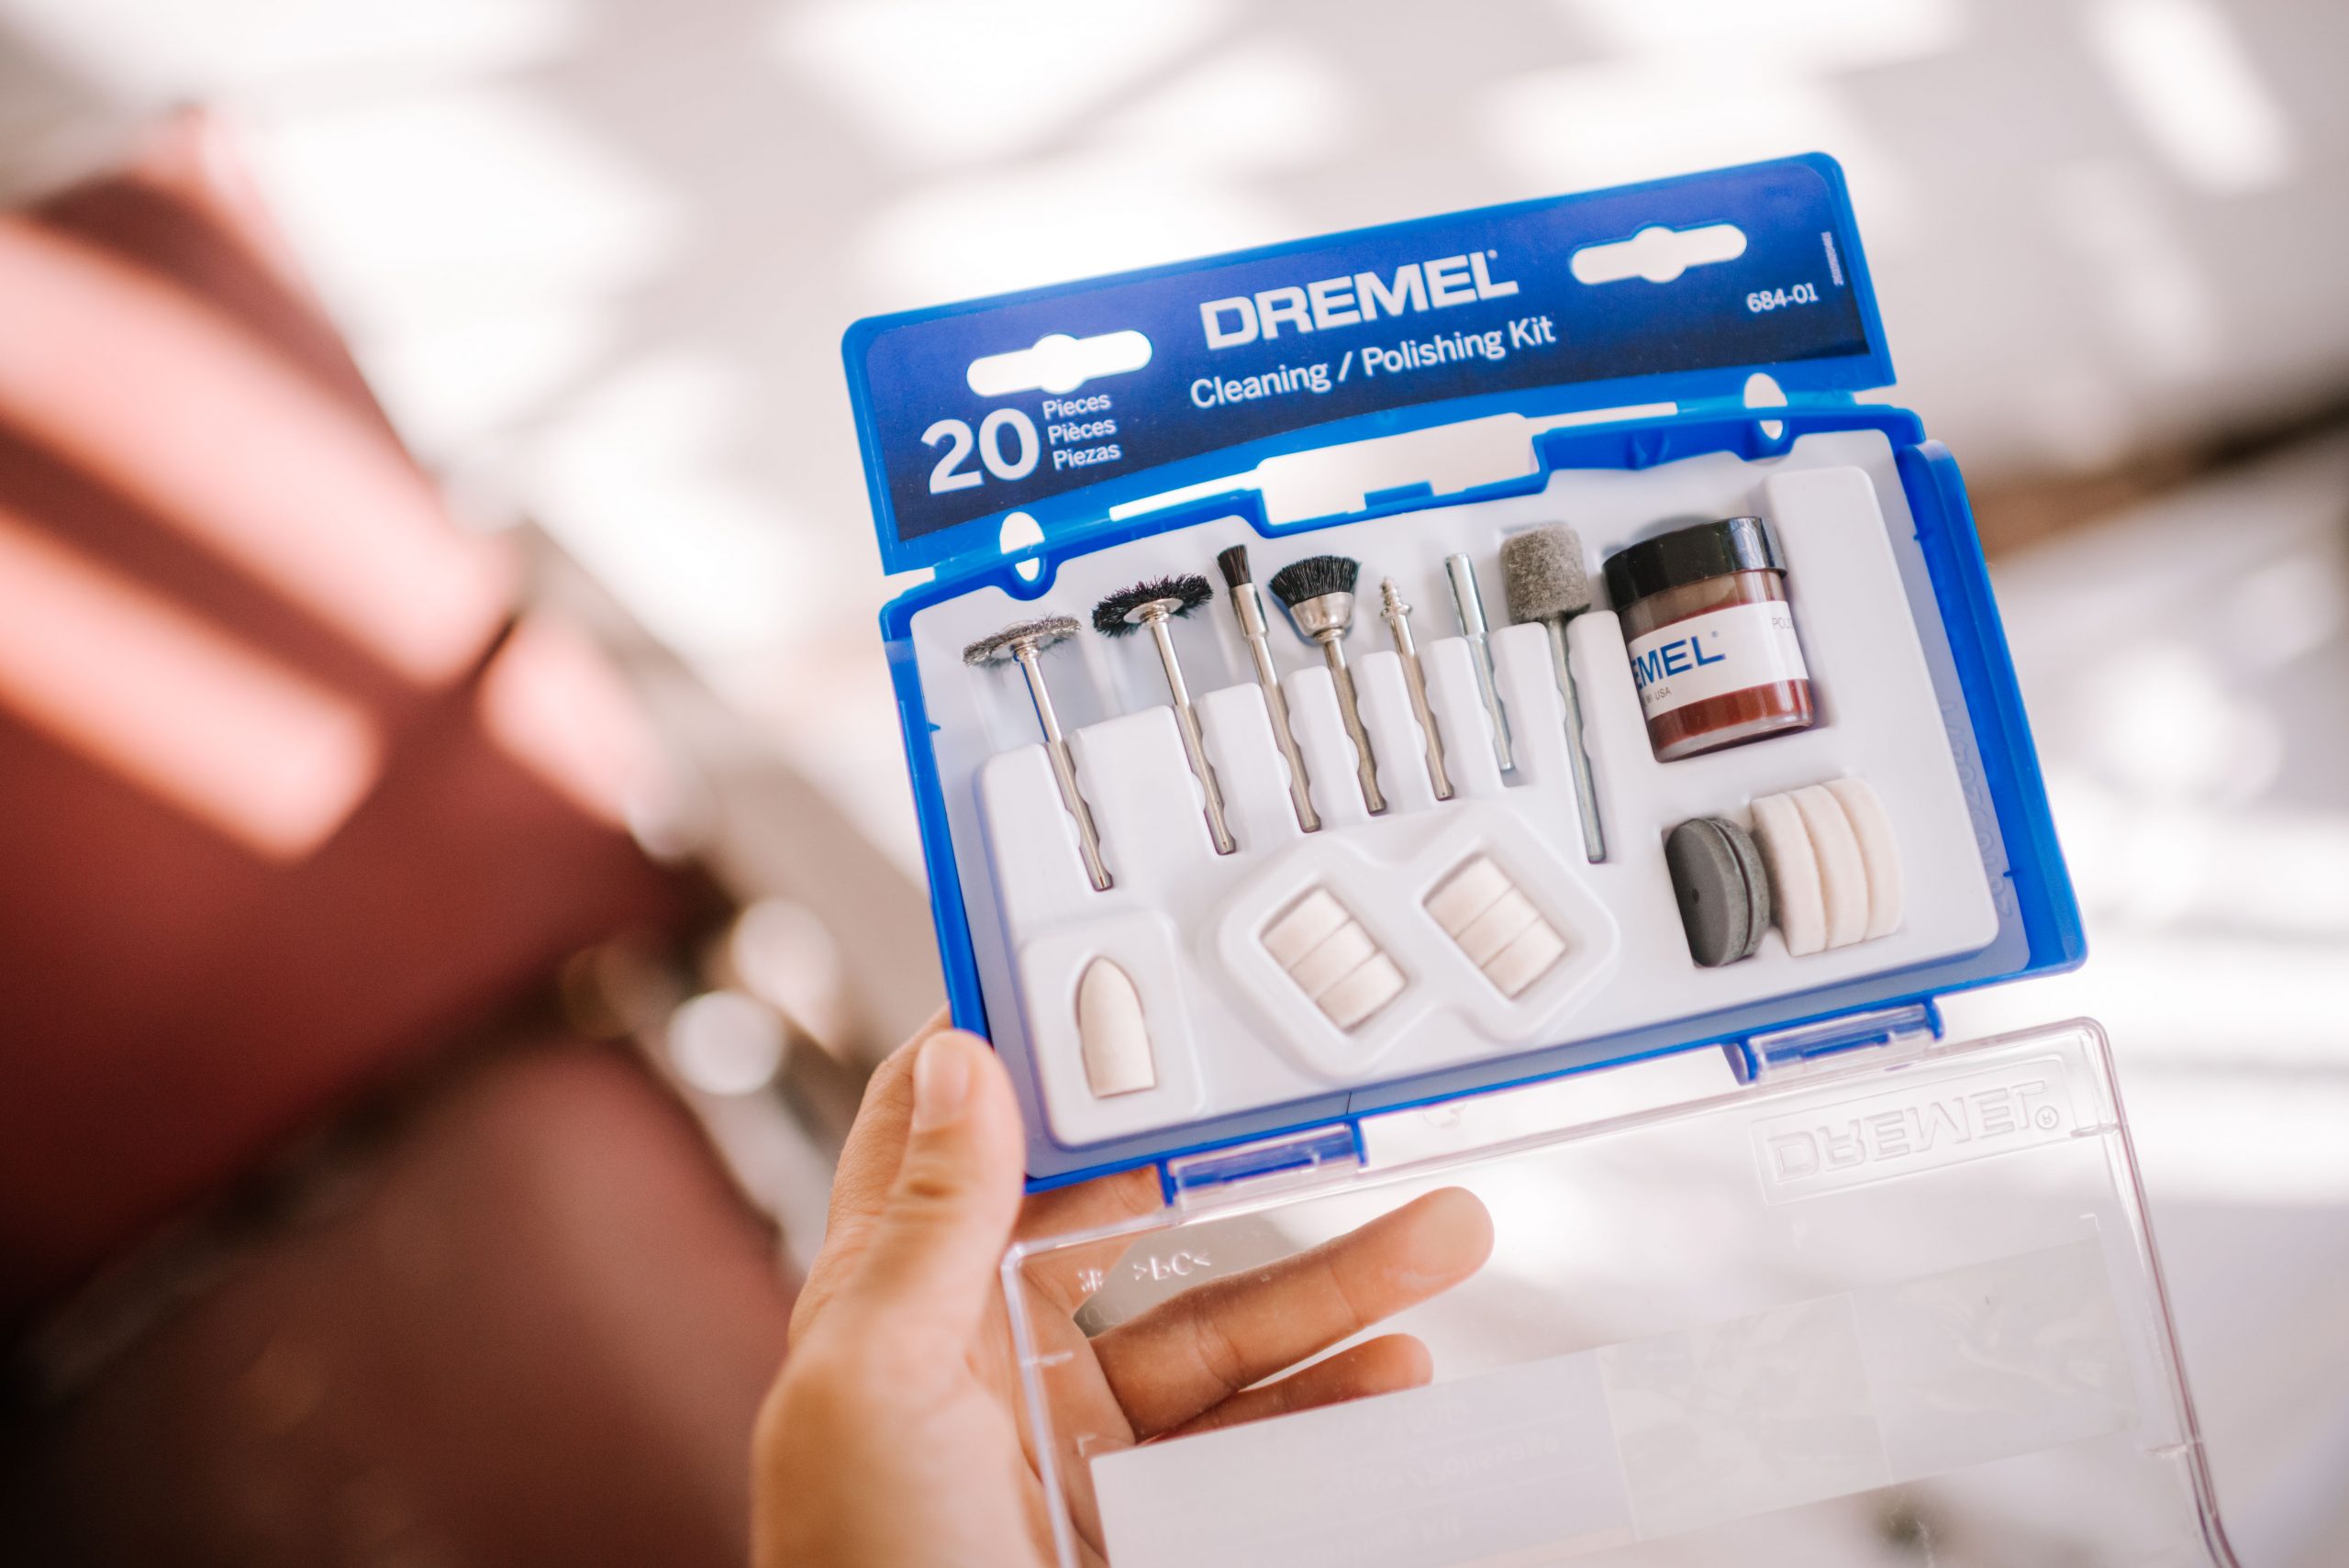 A Quick Guide To Using Your Dremel